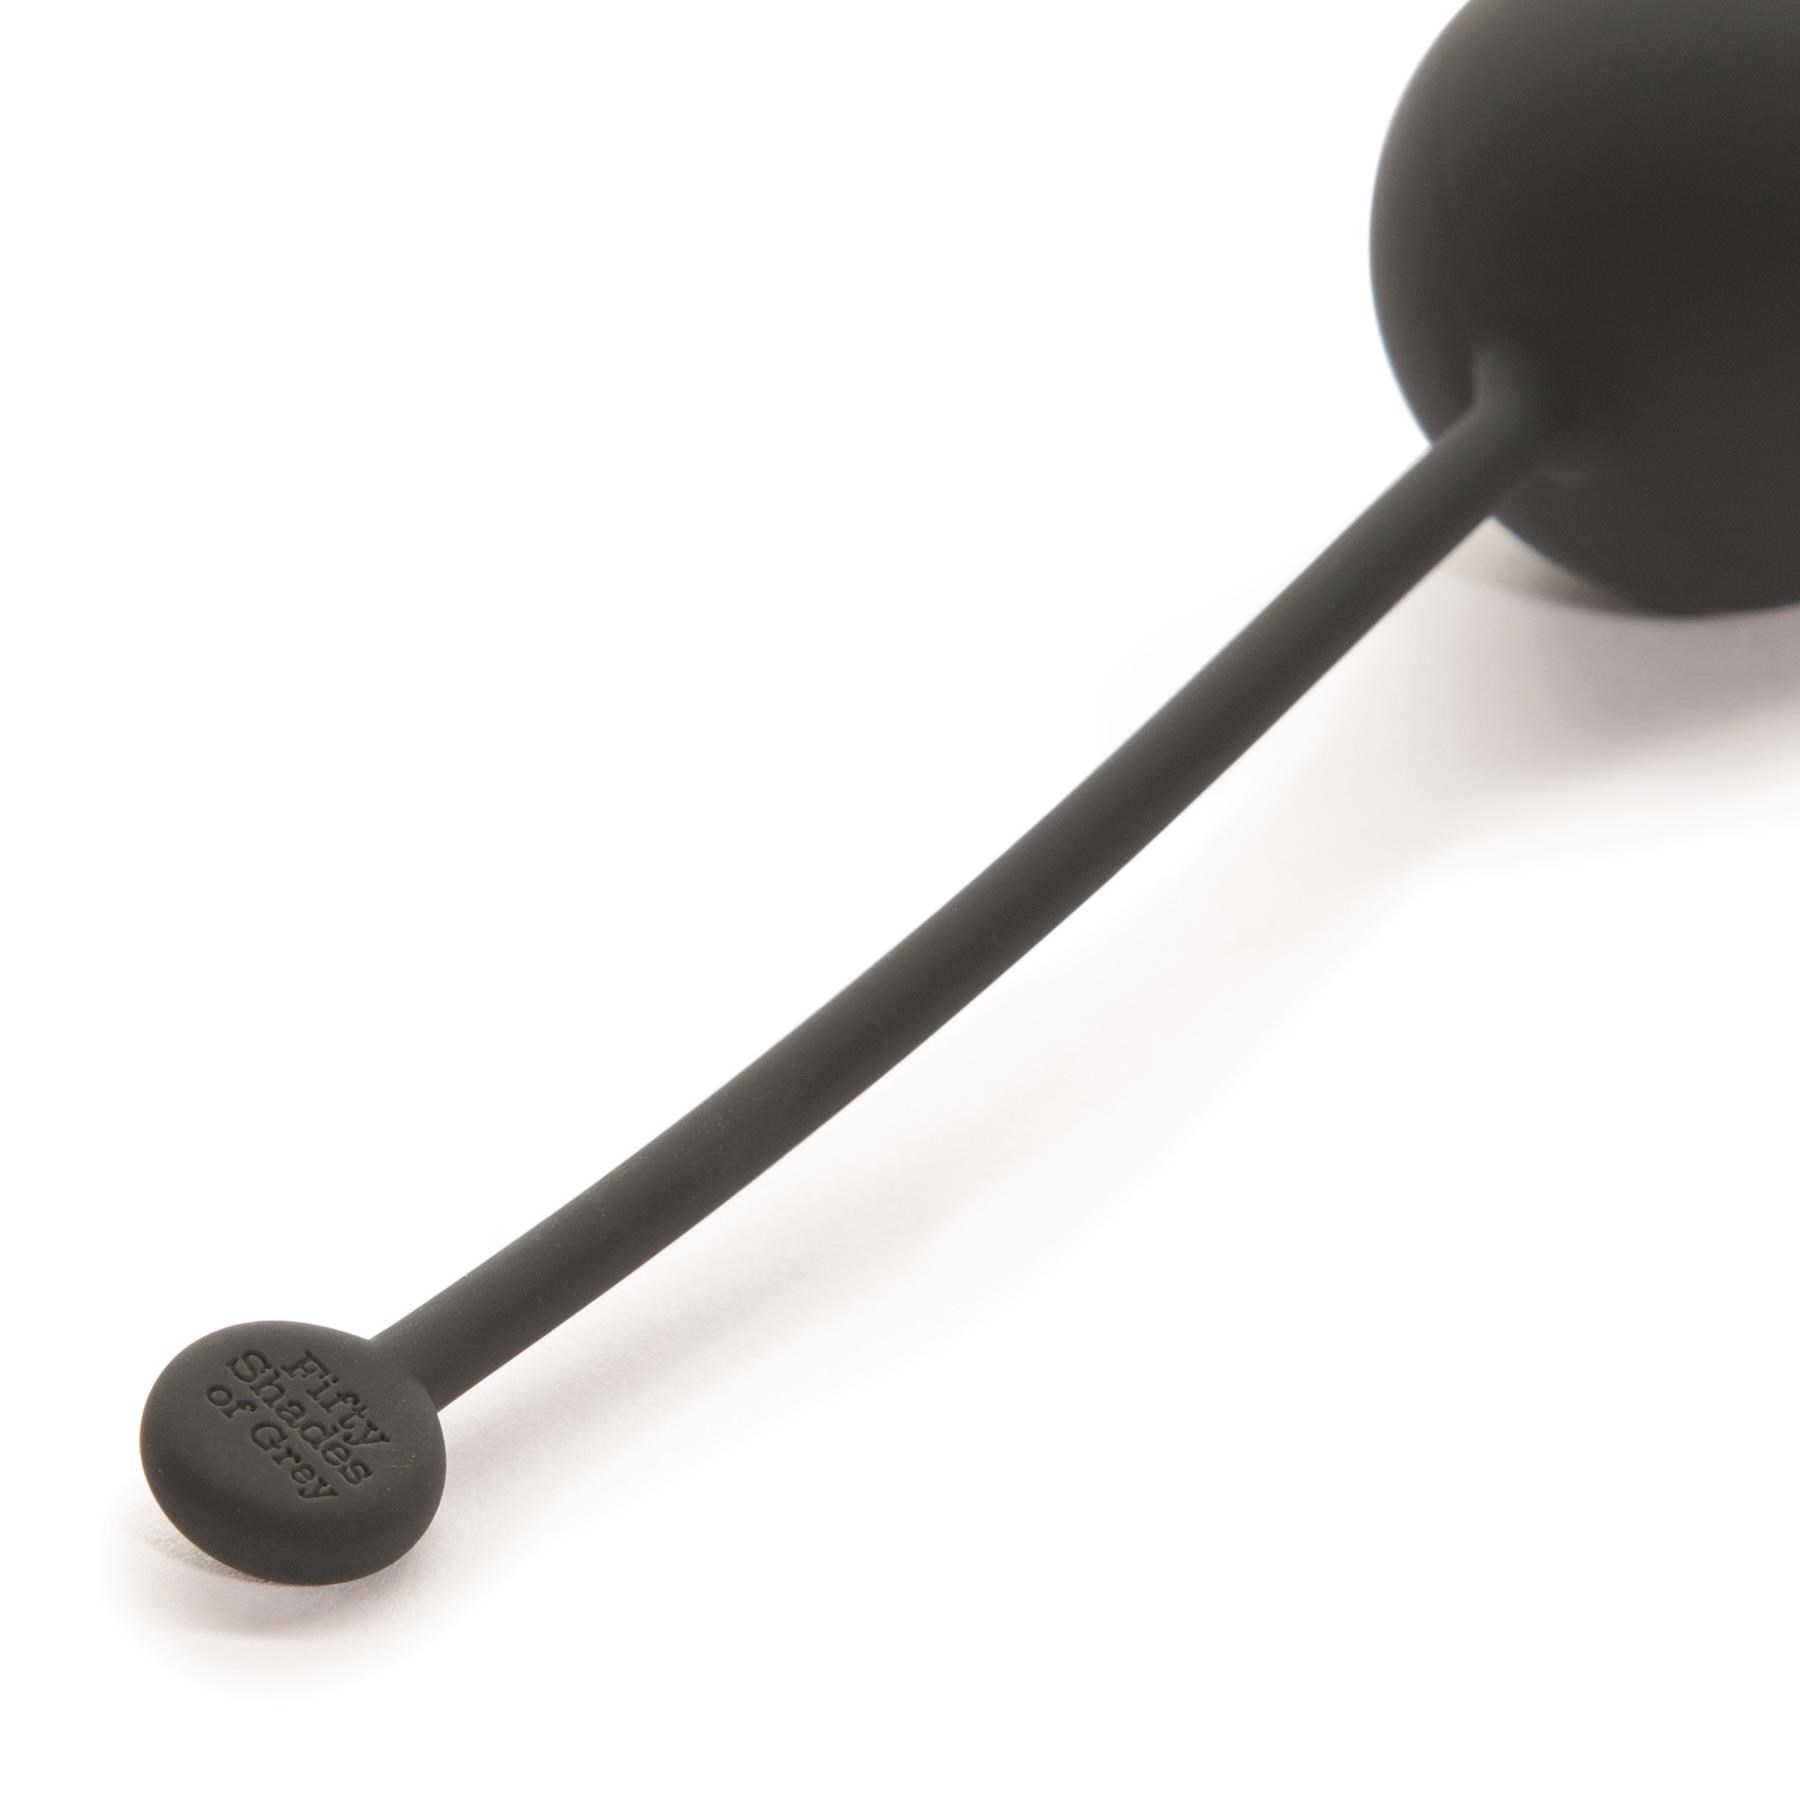 Fifty Shades of Grey Tighten and Tense Jiggle Balls Close up of Retrieval Cord